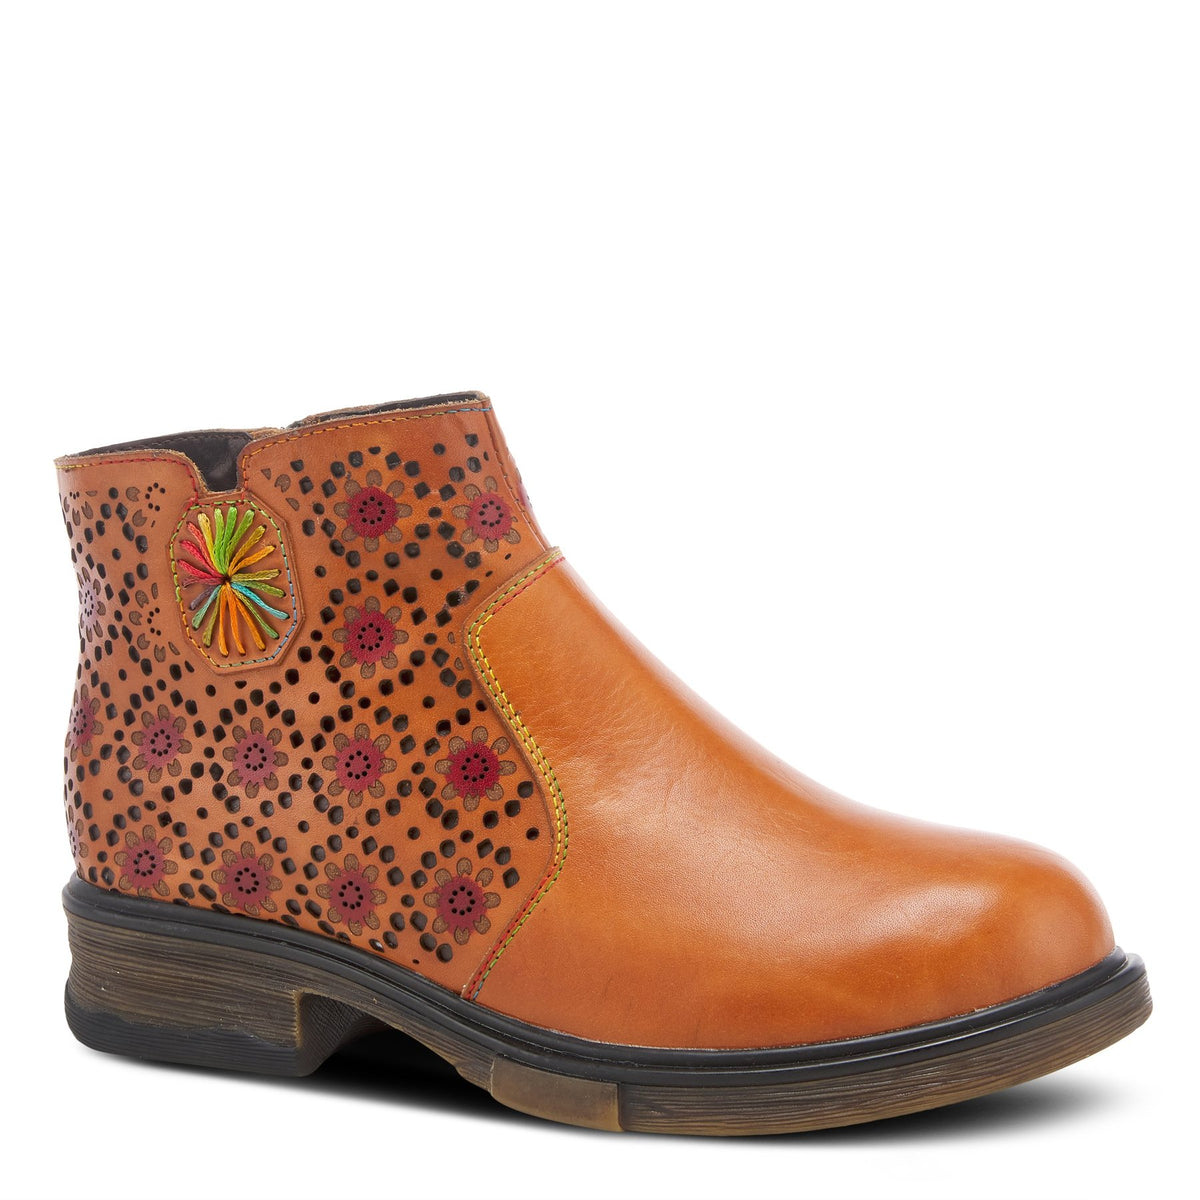 lartiste boots fall 2021 styles springstep footwearFun leather L'Artiste by Springstep Footwear bootie showcasing beautiful abstract flowers, laser cuts, and our signature stitching on a comfortable outsole.